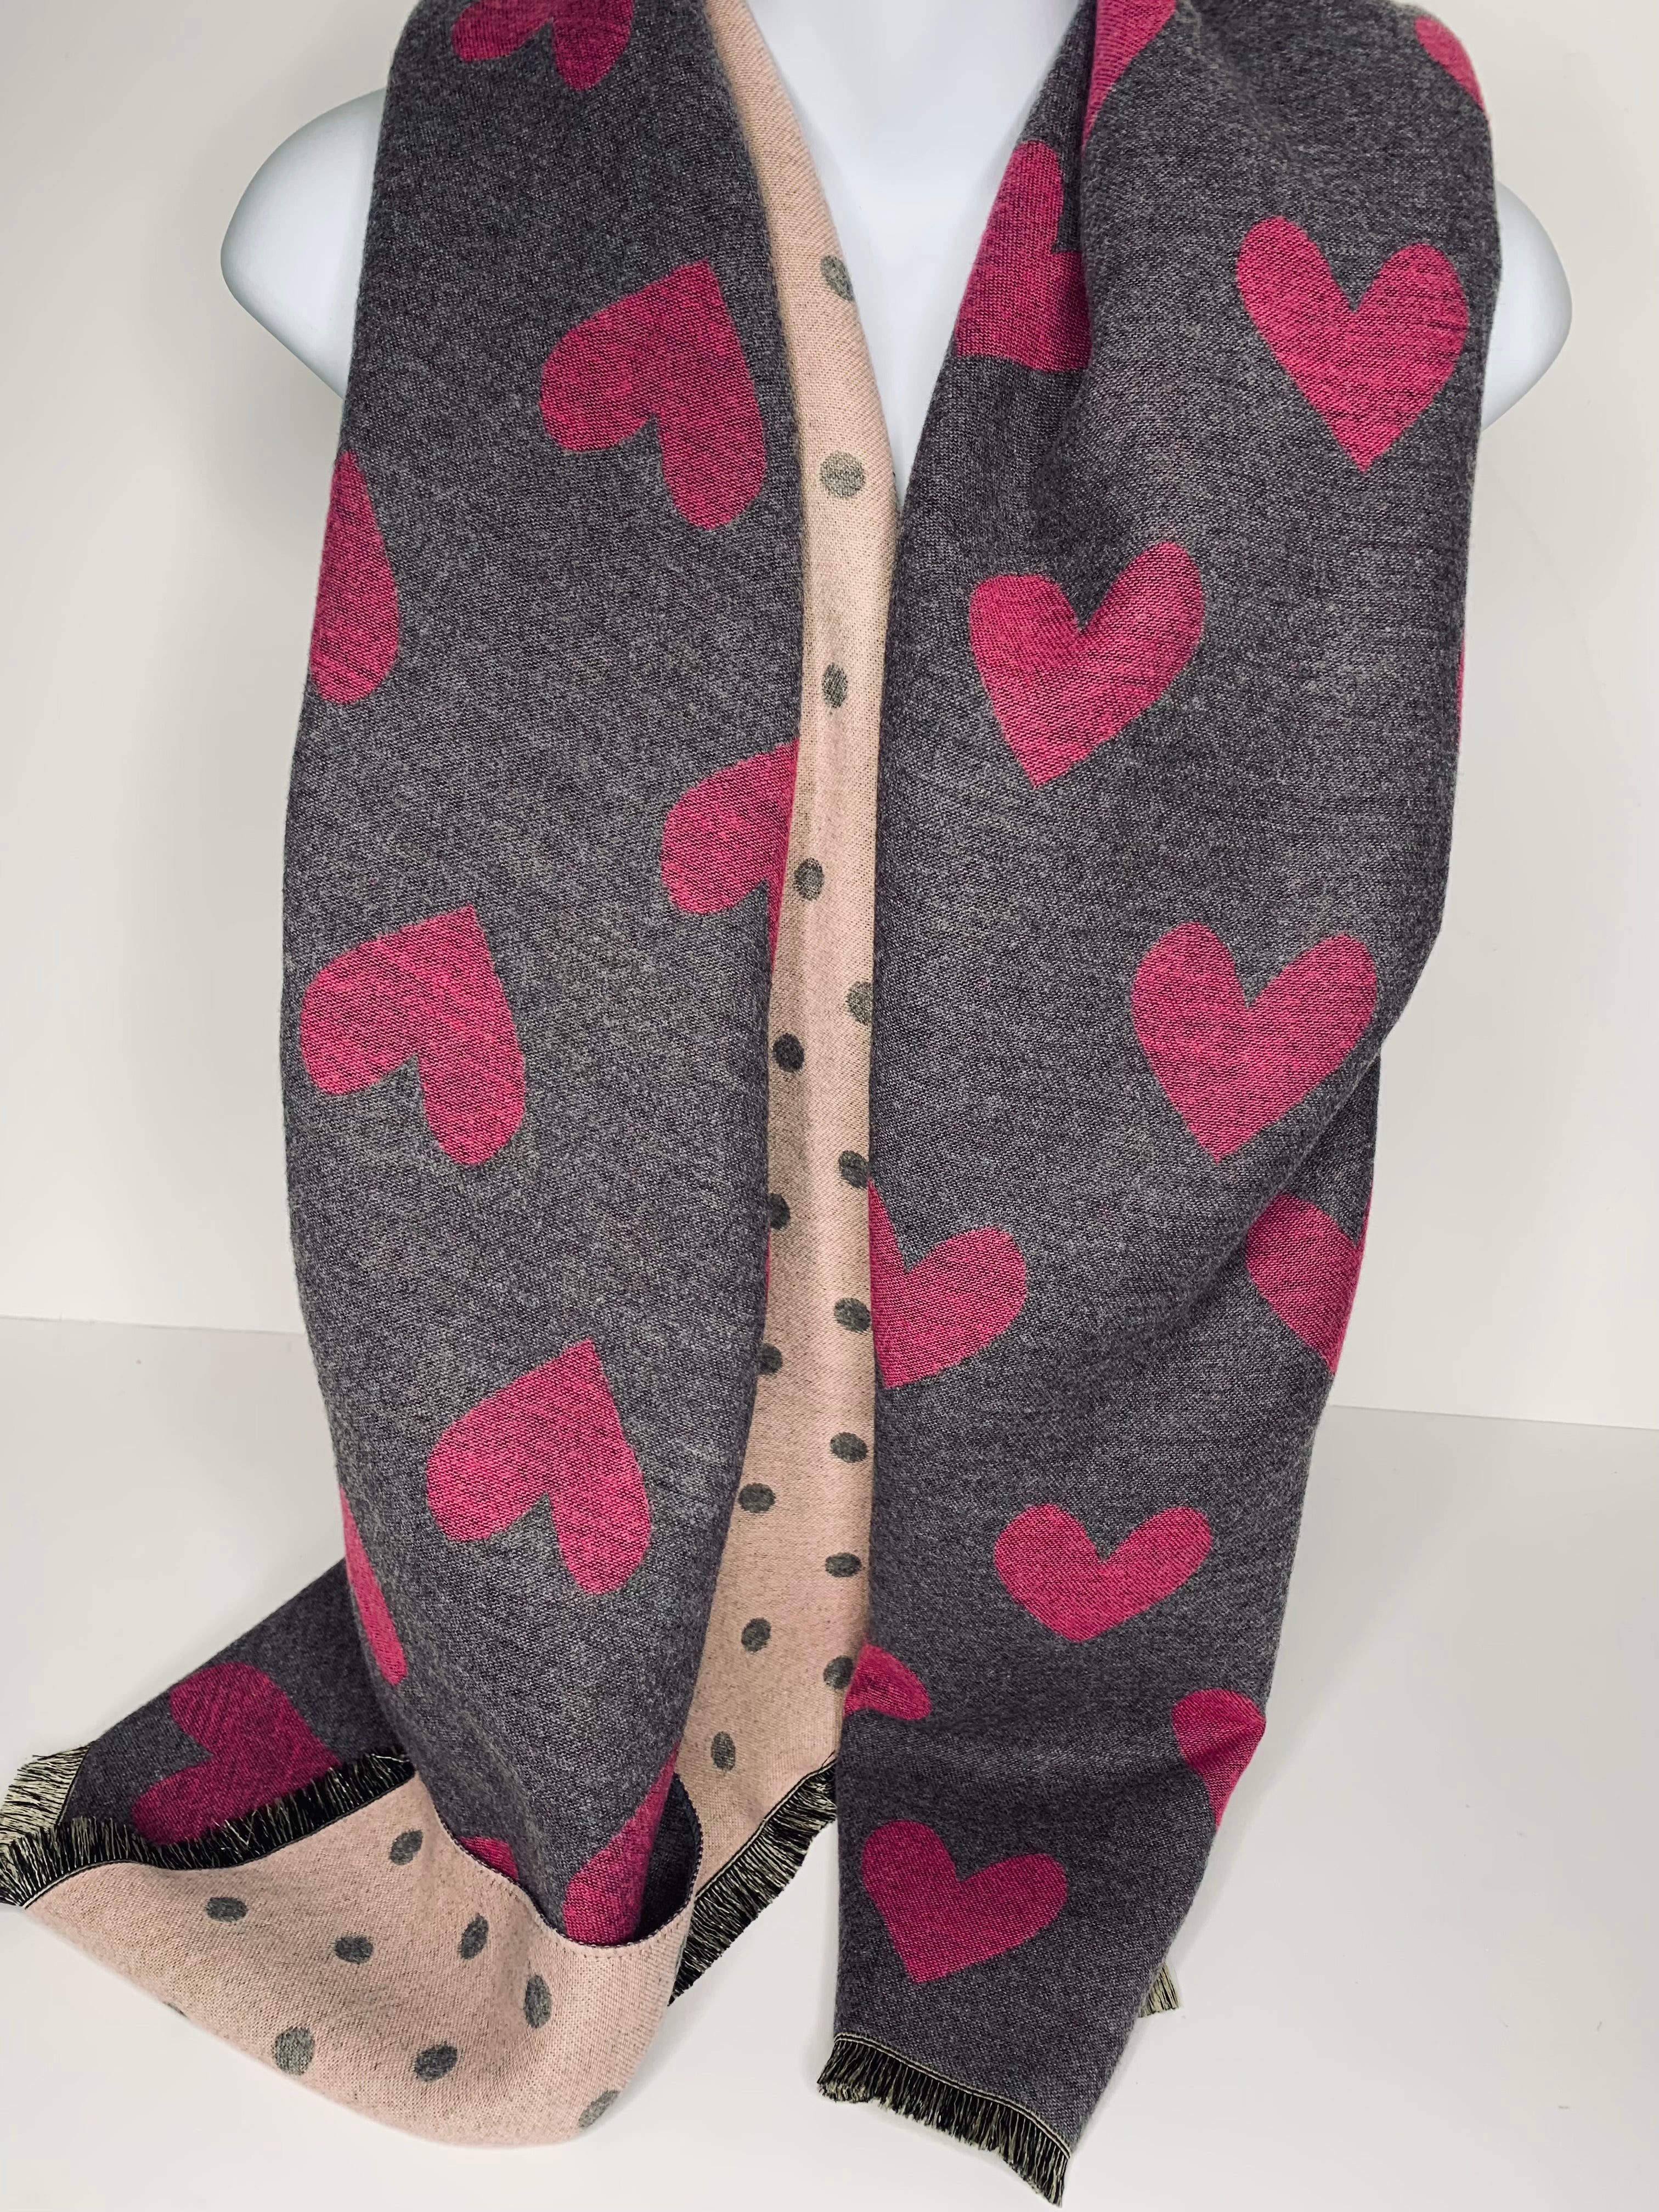 Winter weight, heart 'polka-dot' print scarf in shades of baby pink, fuchsia and grey